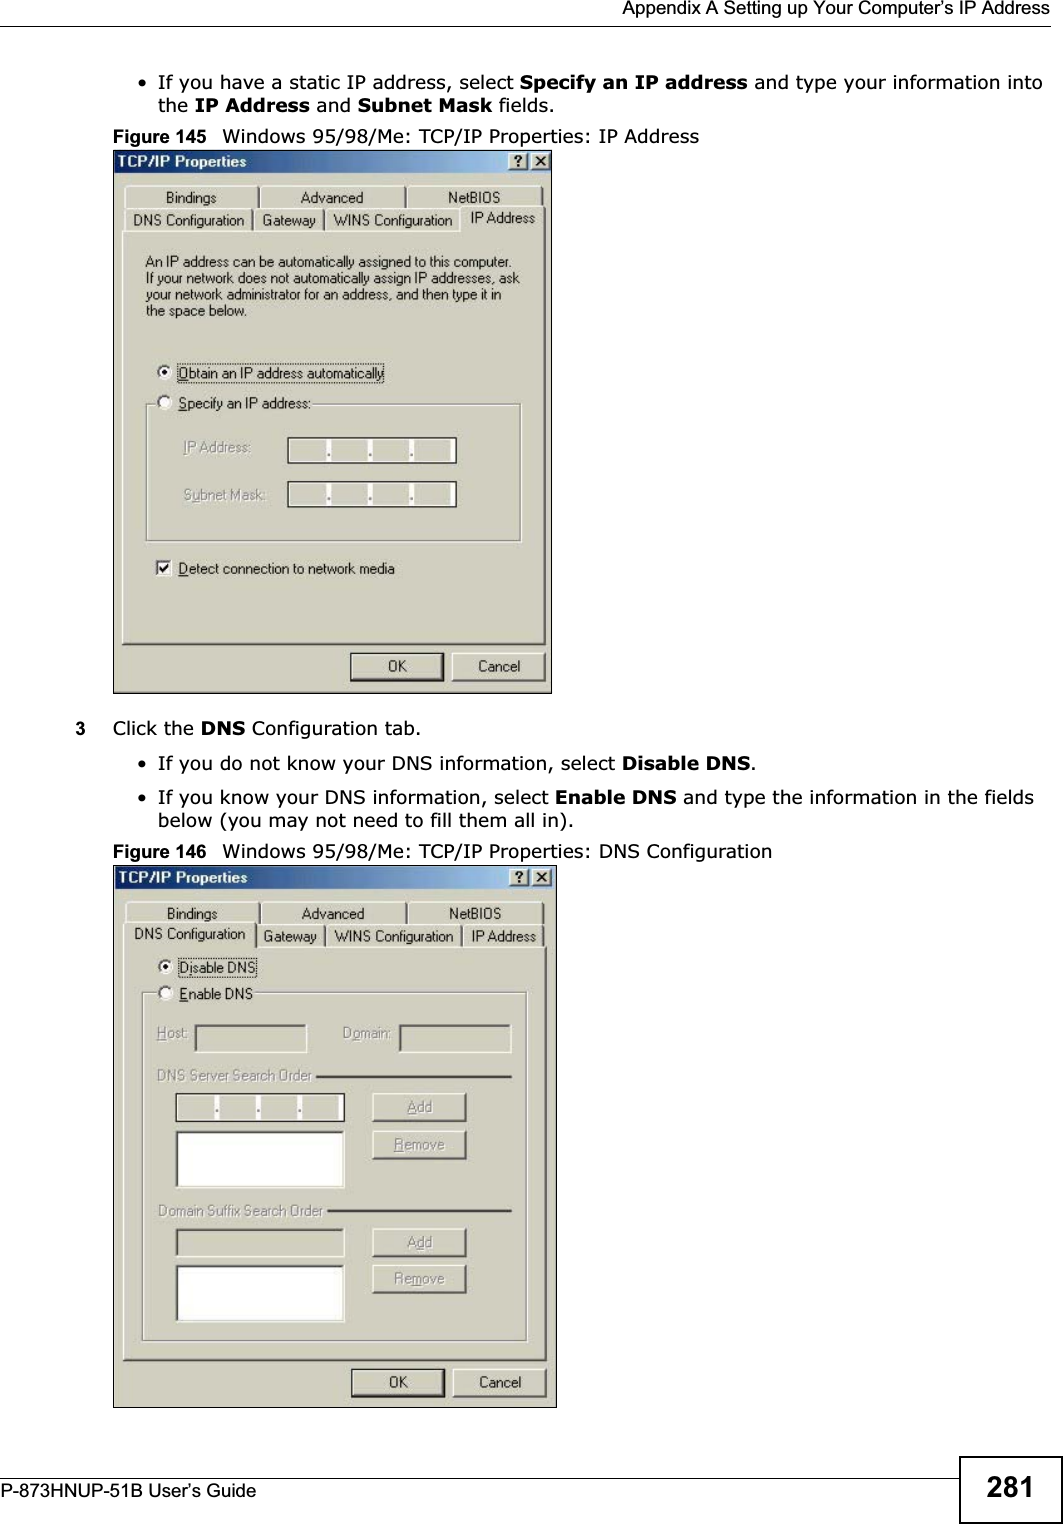  Appendix A Setting up Your Computer’s IP AddressP-873HNUP-51B User’s Guide 281• If you have a static IP address, select Specify an IP address and type your information into the IP Address and Subnet Mask fields.Figure 145   Windows 95/98/Me: TCP/IP Properties: IP Address3Click the DNS Configuration tab.• If you do not know your DNS information, select Disable DNS.• If you know your DNS information, select Enable DNS and type the information in the fields below (you may not need to fill them all in).Figure 146   Windows 95/98/Me: TCP/IP Properties: DNS Configuration